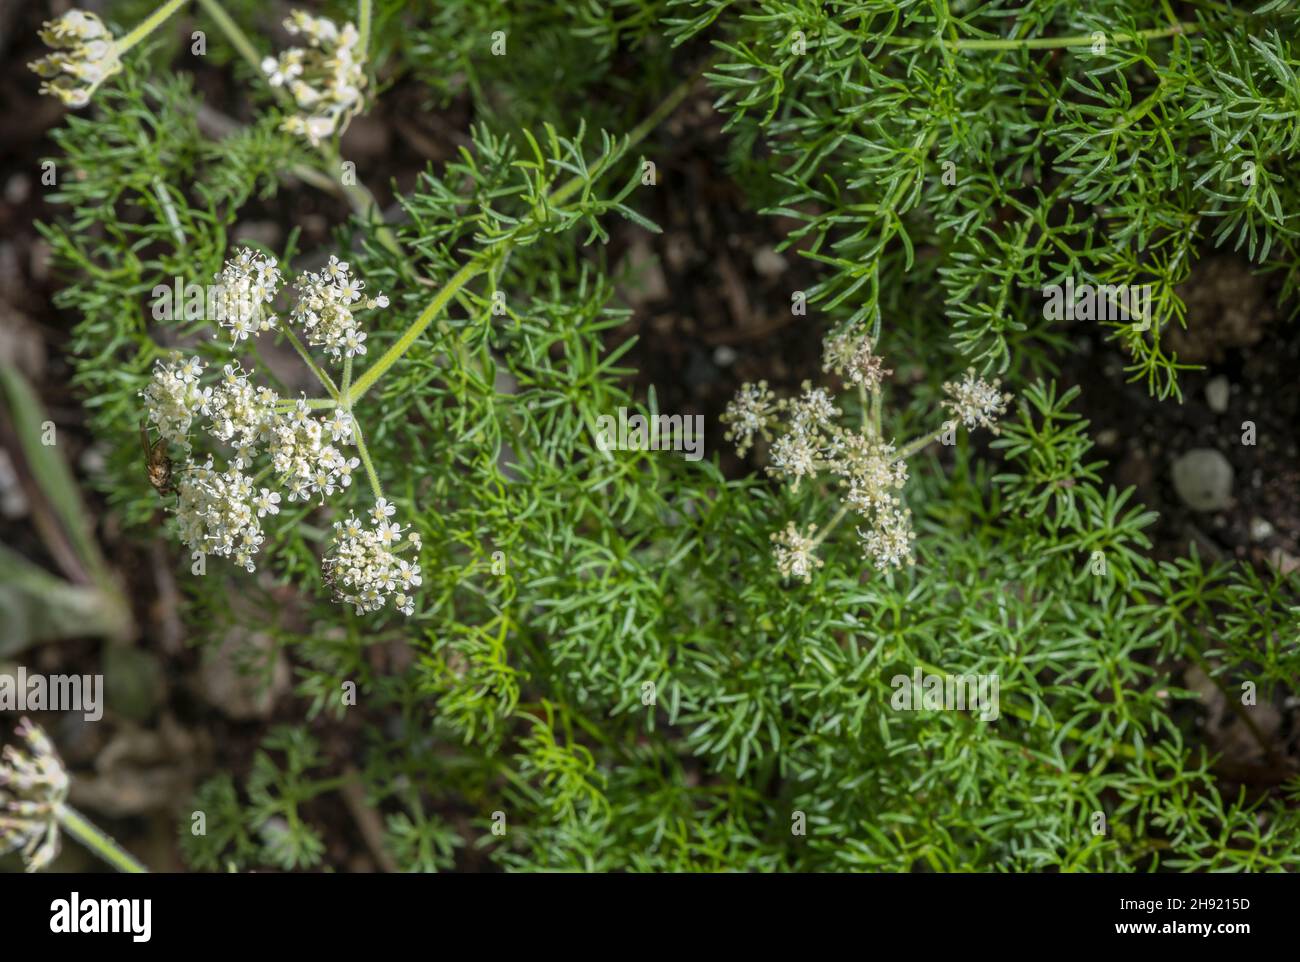 Athamanta, Athamanta cretensis, in flower on rocky slope, Alps. Stock Photo